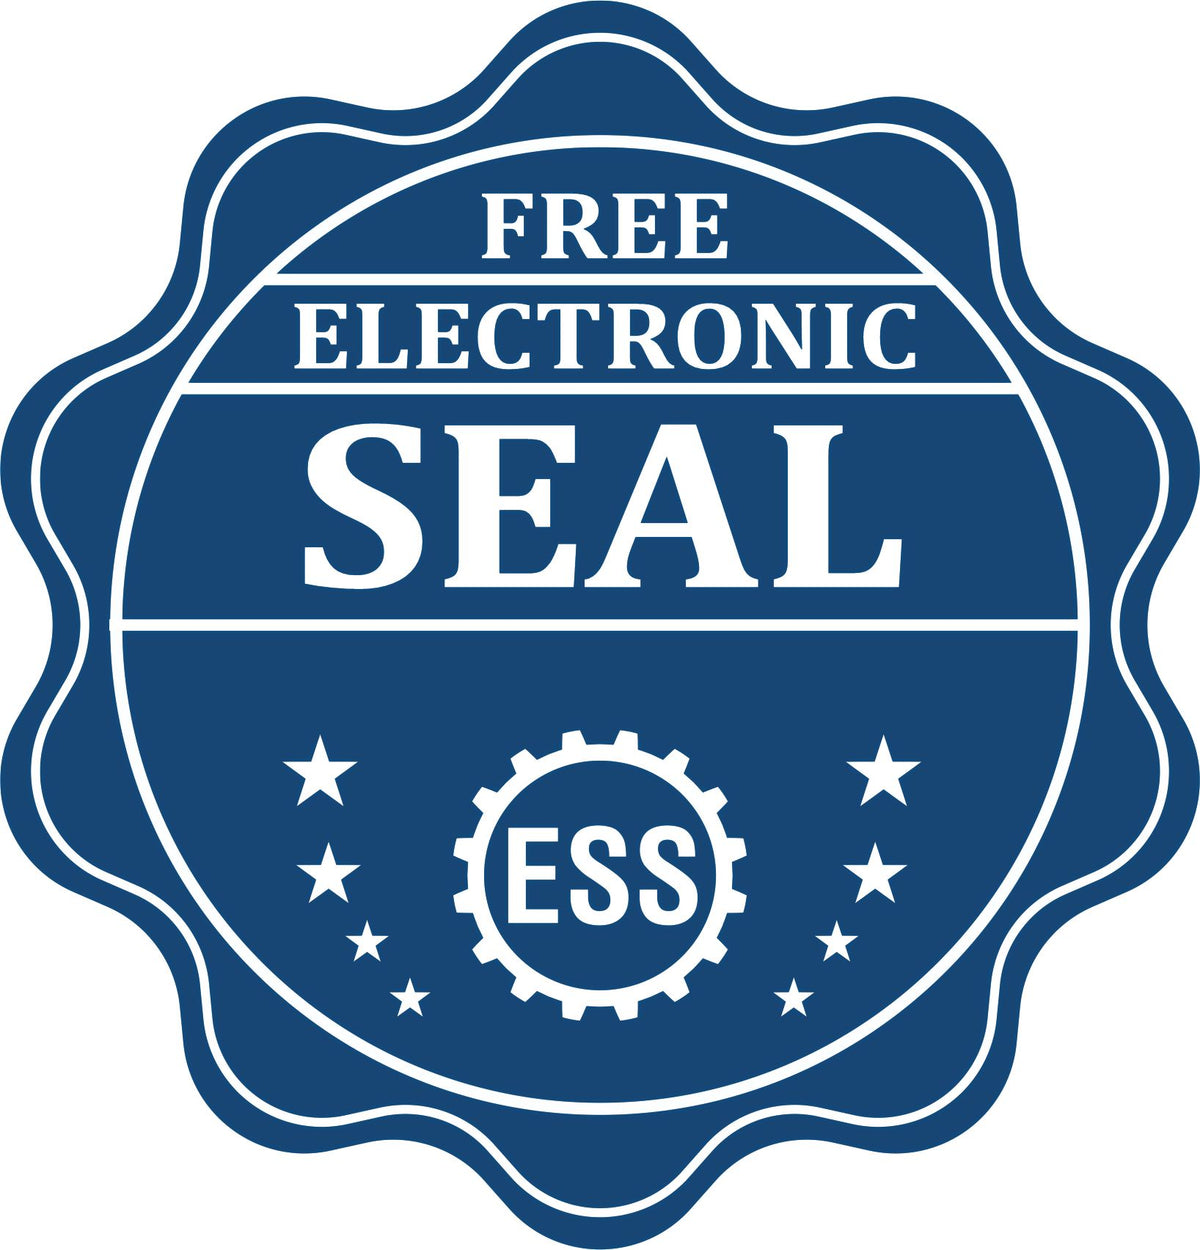 A badge showing a free electronic seal for the Hybrid Idaho Land Surveyor Seal with stars and the ESS gear on the emblem.